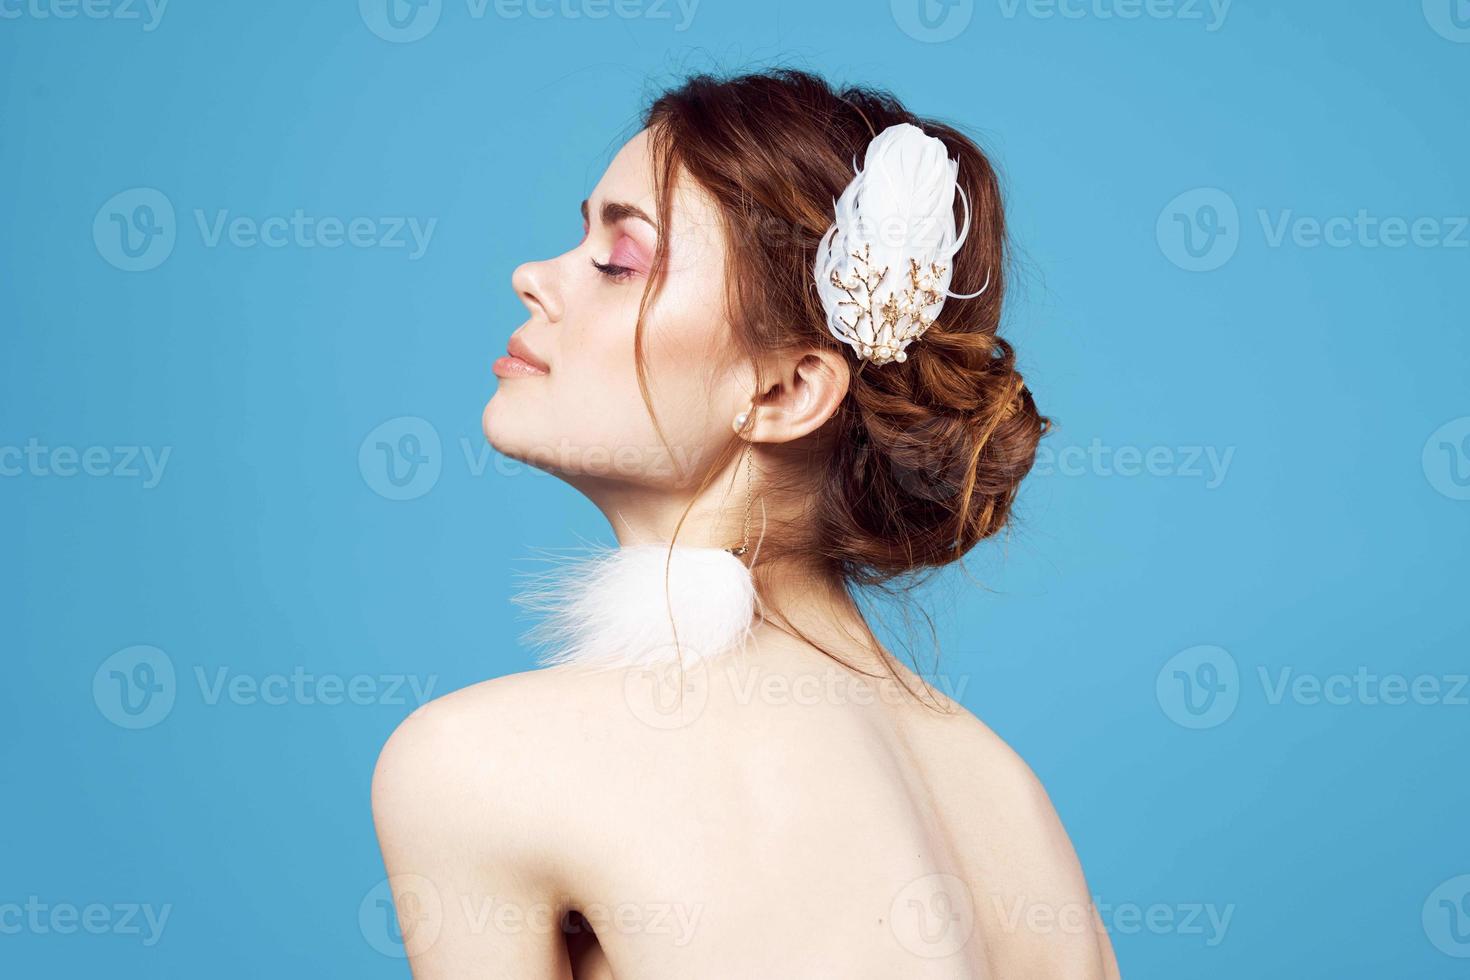 pretty woman with bare shoulders charm bright makeup glamor blue background photo